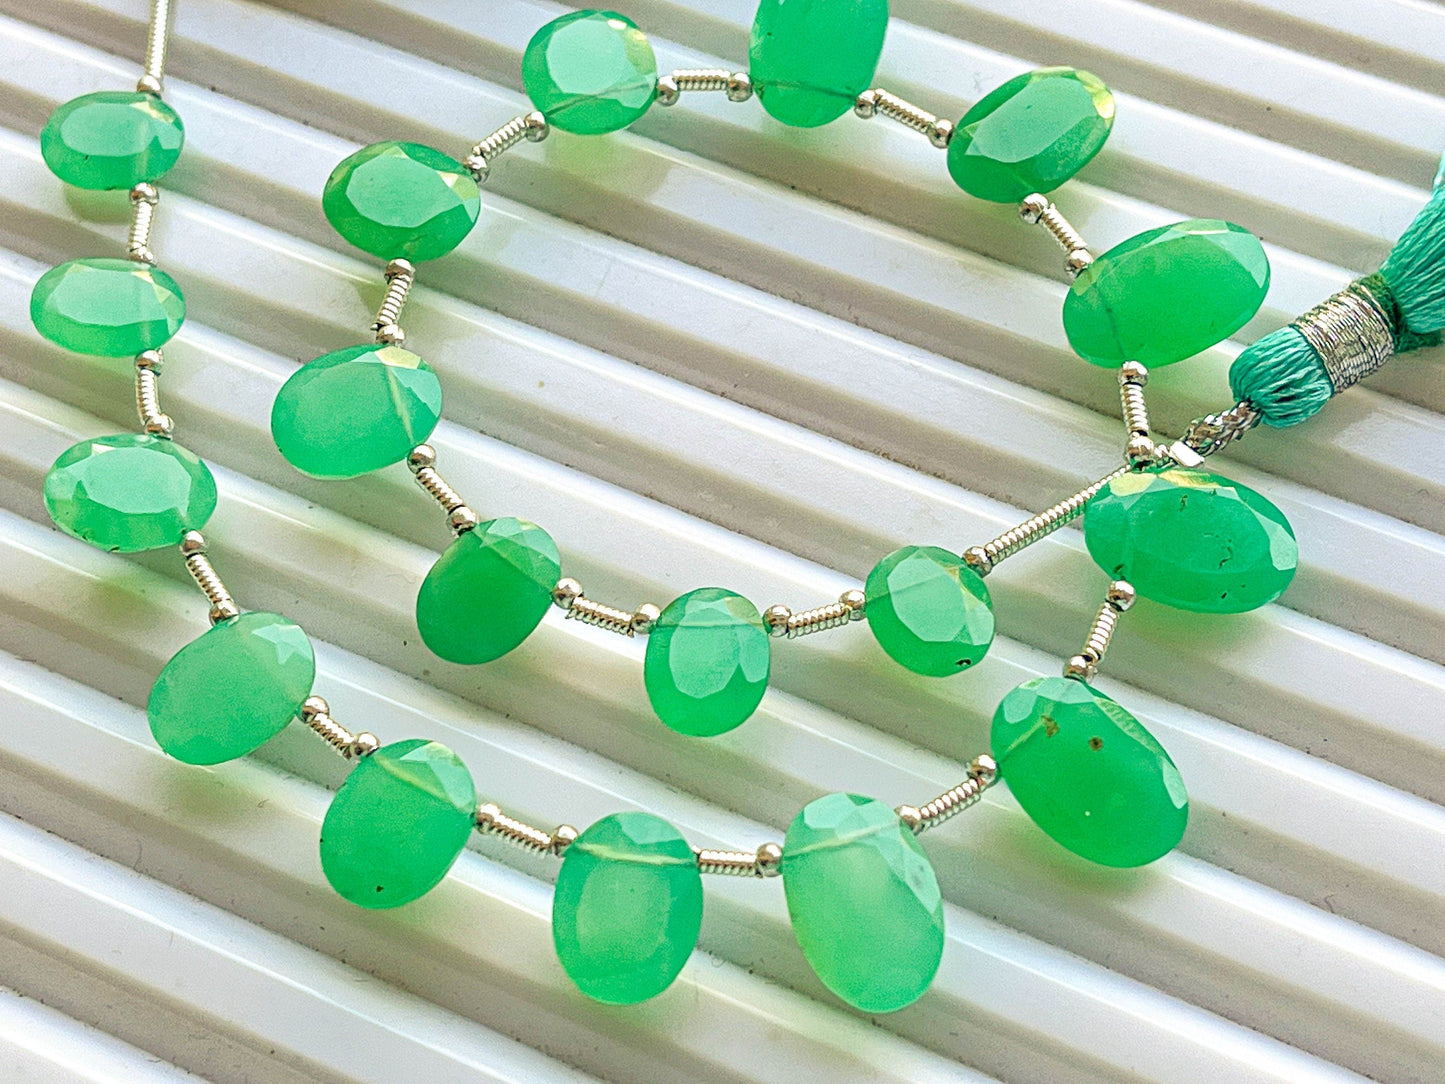 18 Pieces AAA Australian Chrysoprase Oval Shape Cut Stone Beads, Natural Chrysoprase Gemstone, Chrysoprase Briolette Beads, 7x9mm to 8x12mm Beadsforyourjewelry